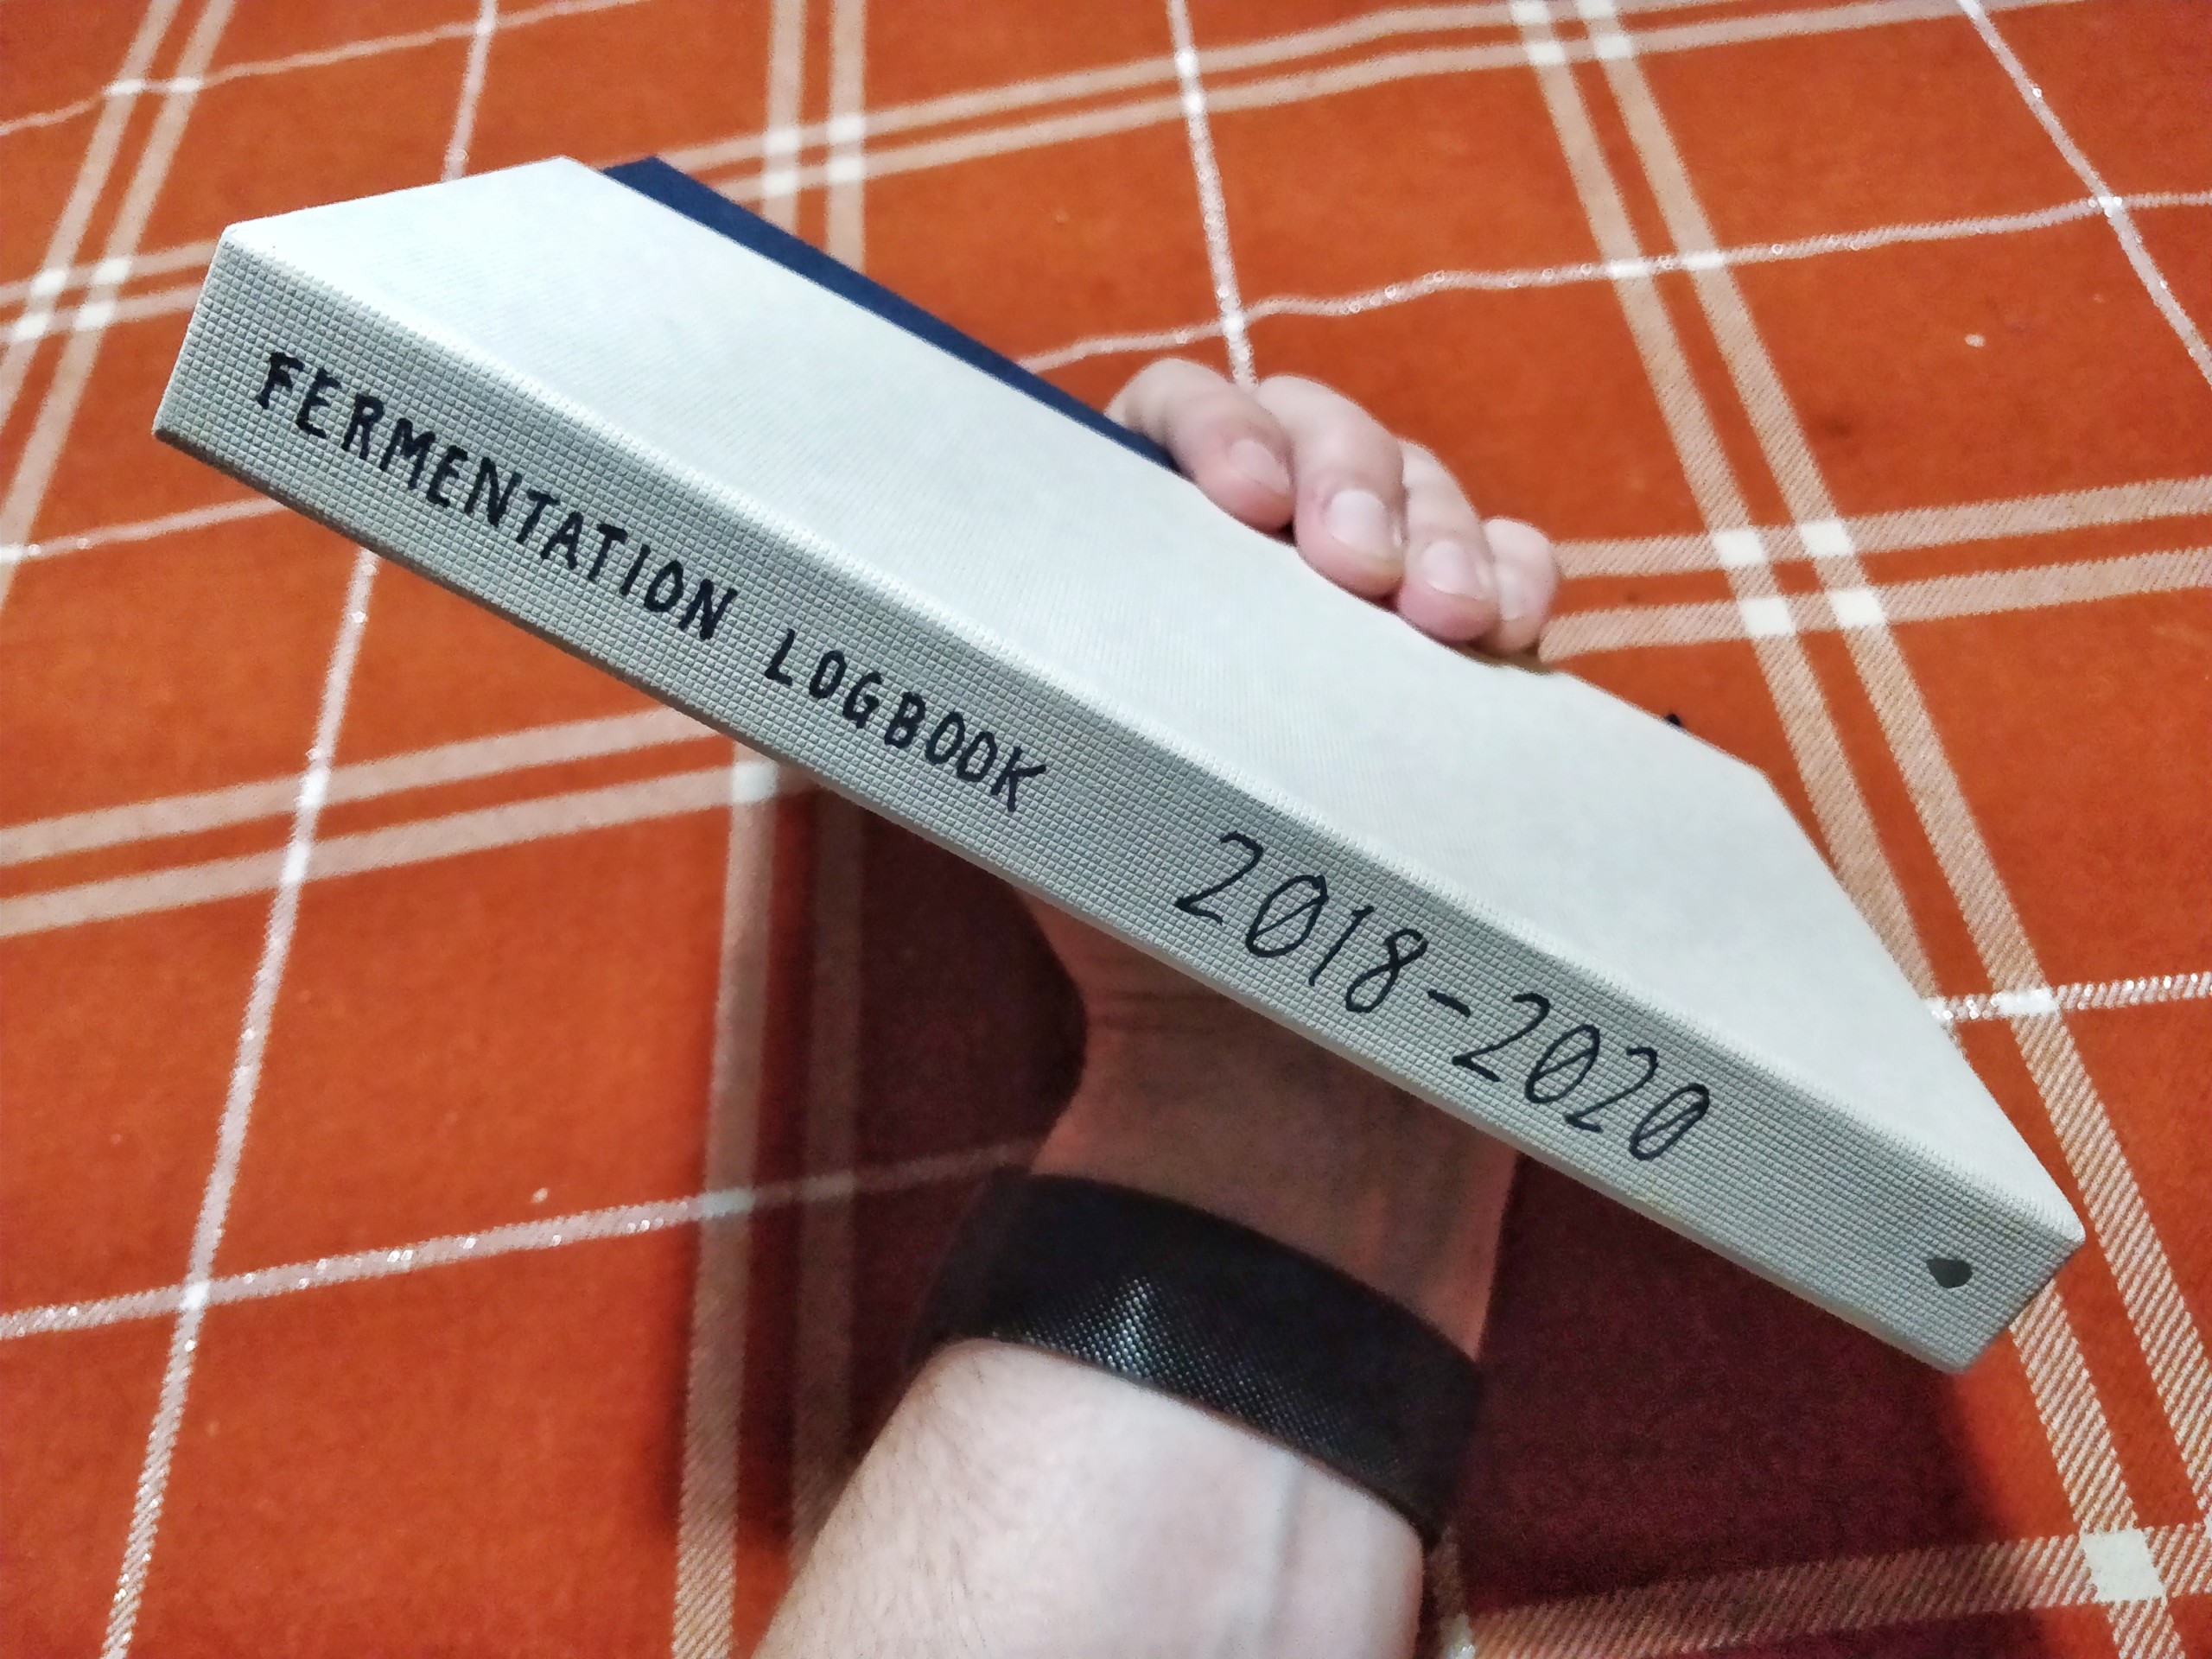 My first fermentation logbook, filled with 69 different projects between 2018-2020.